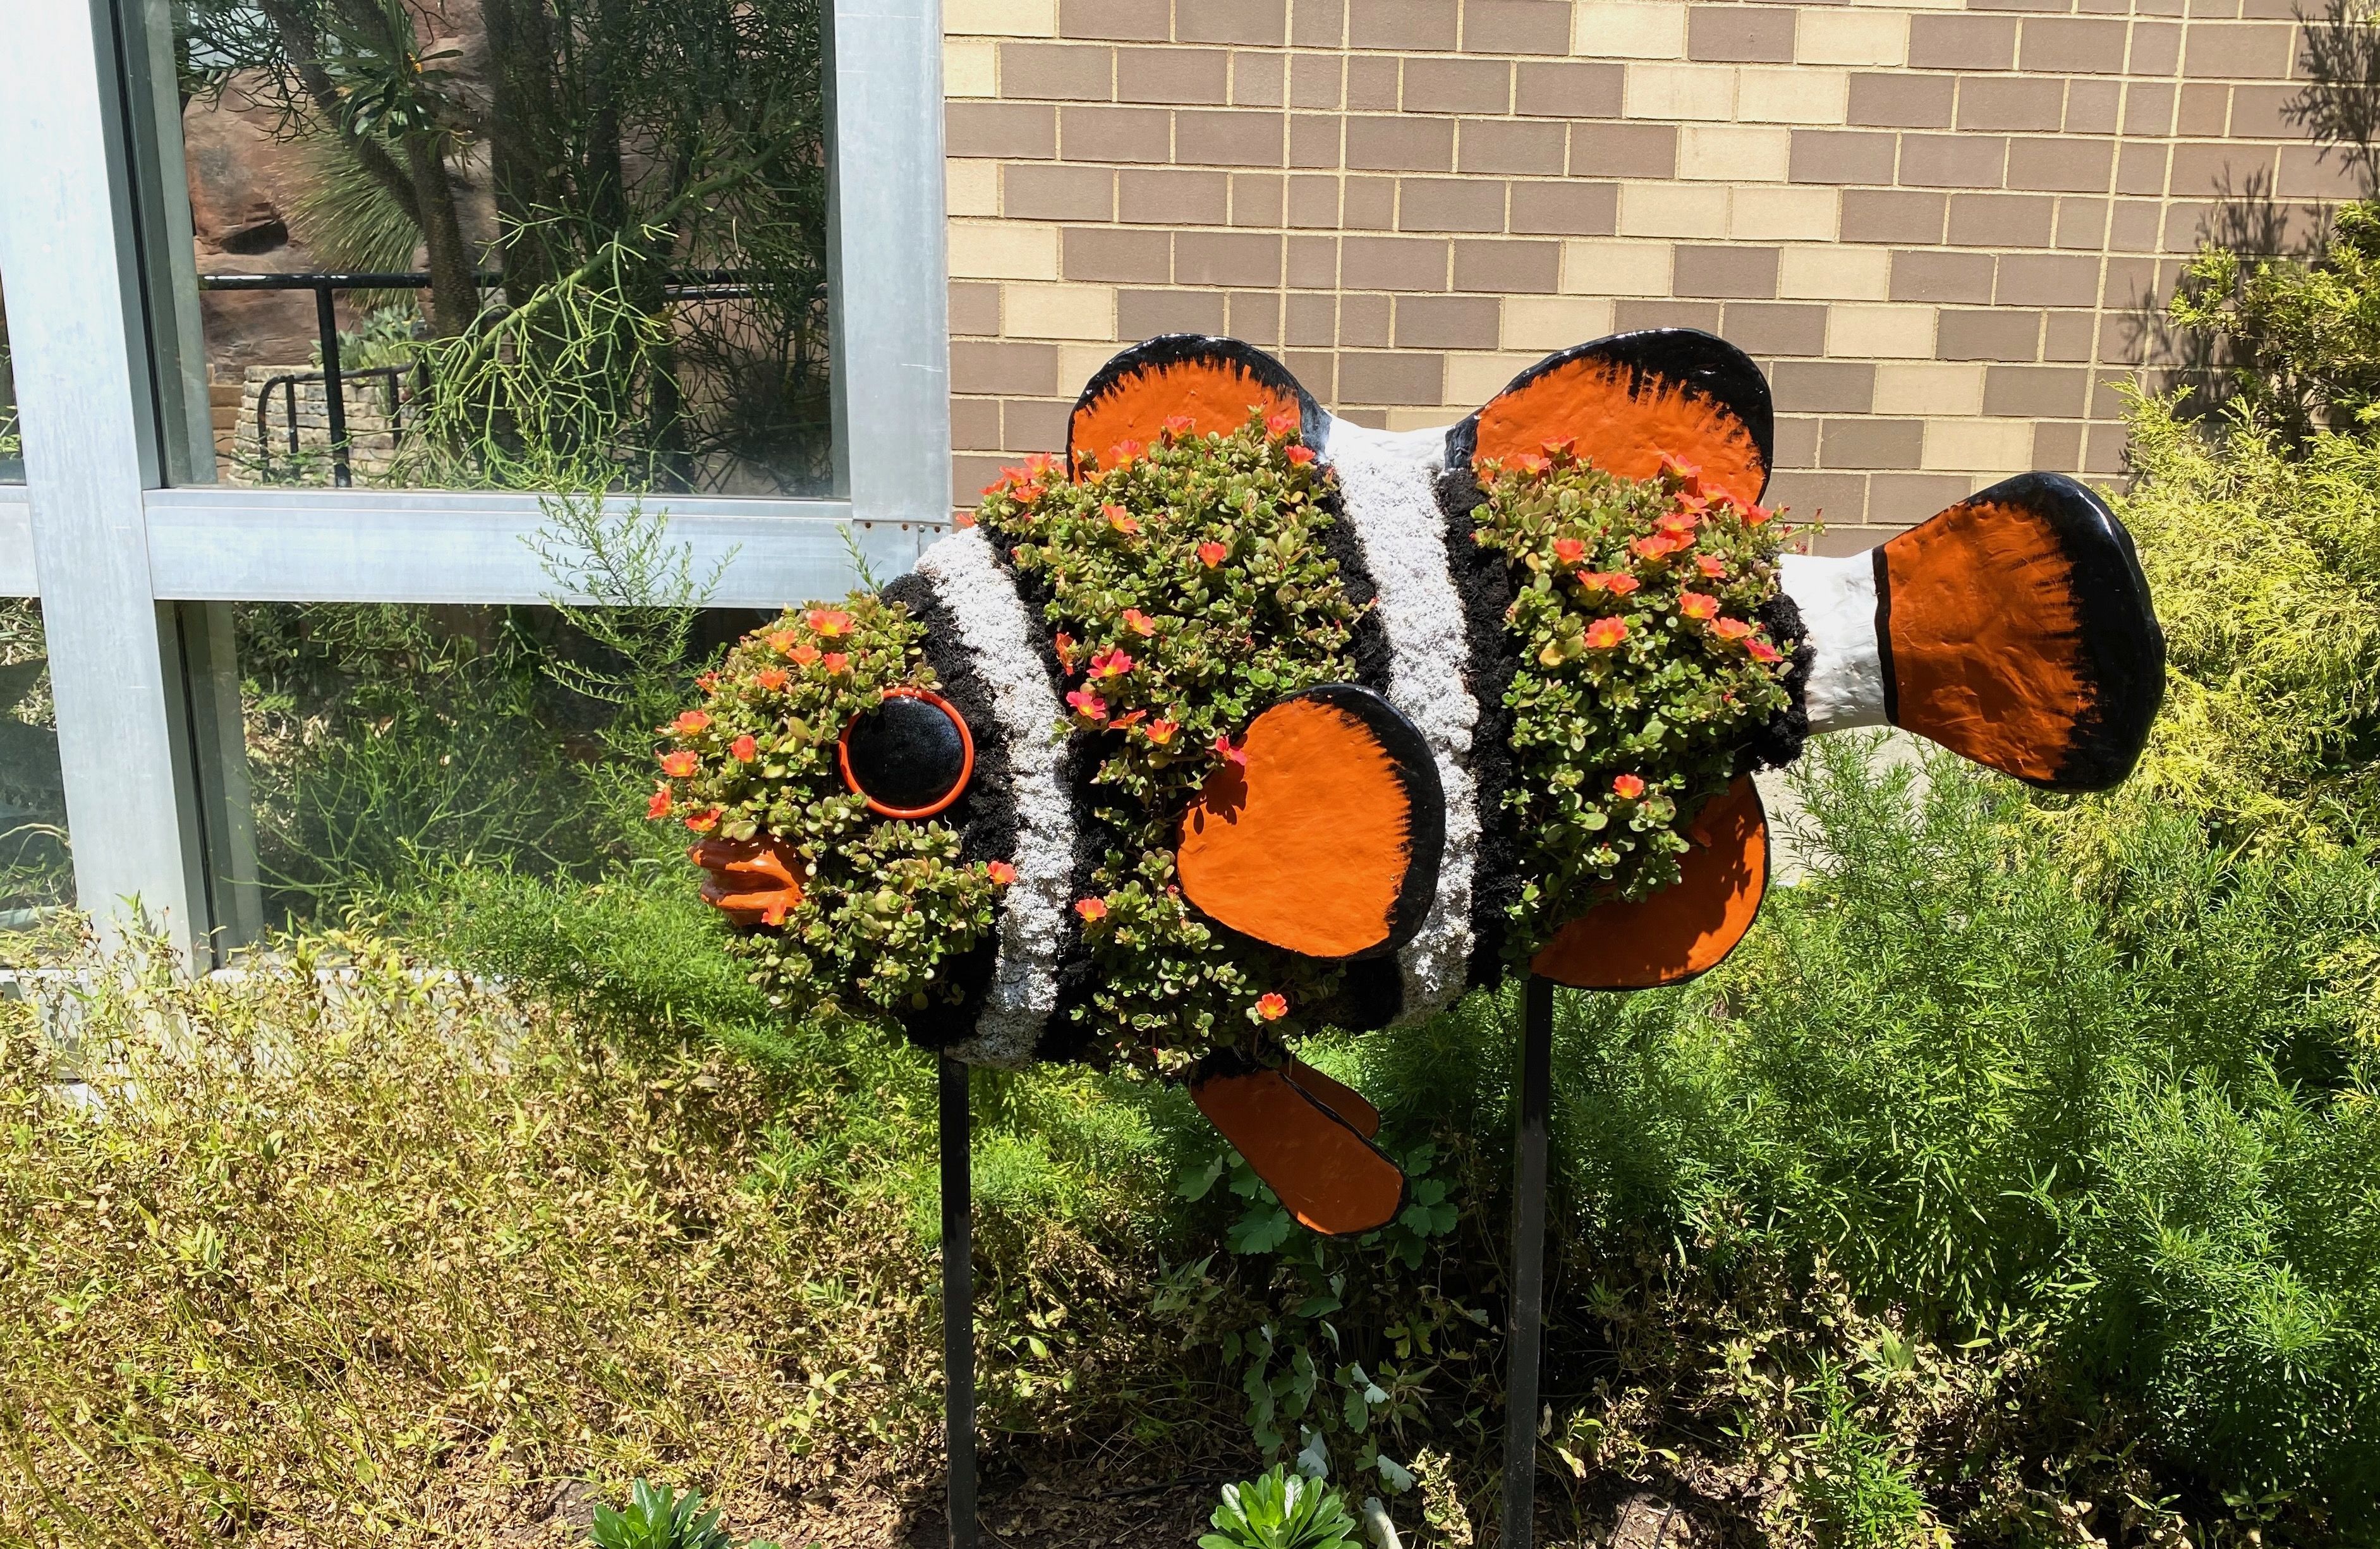 A clownfish topiary